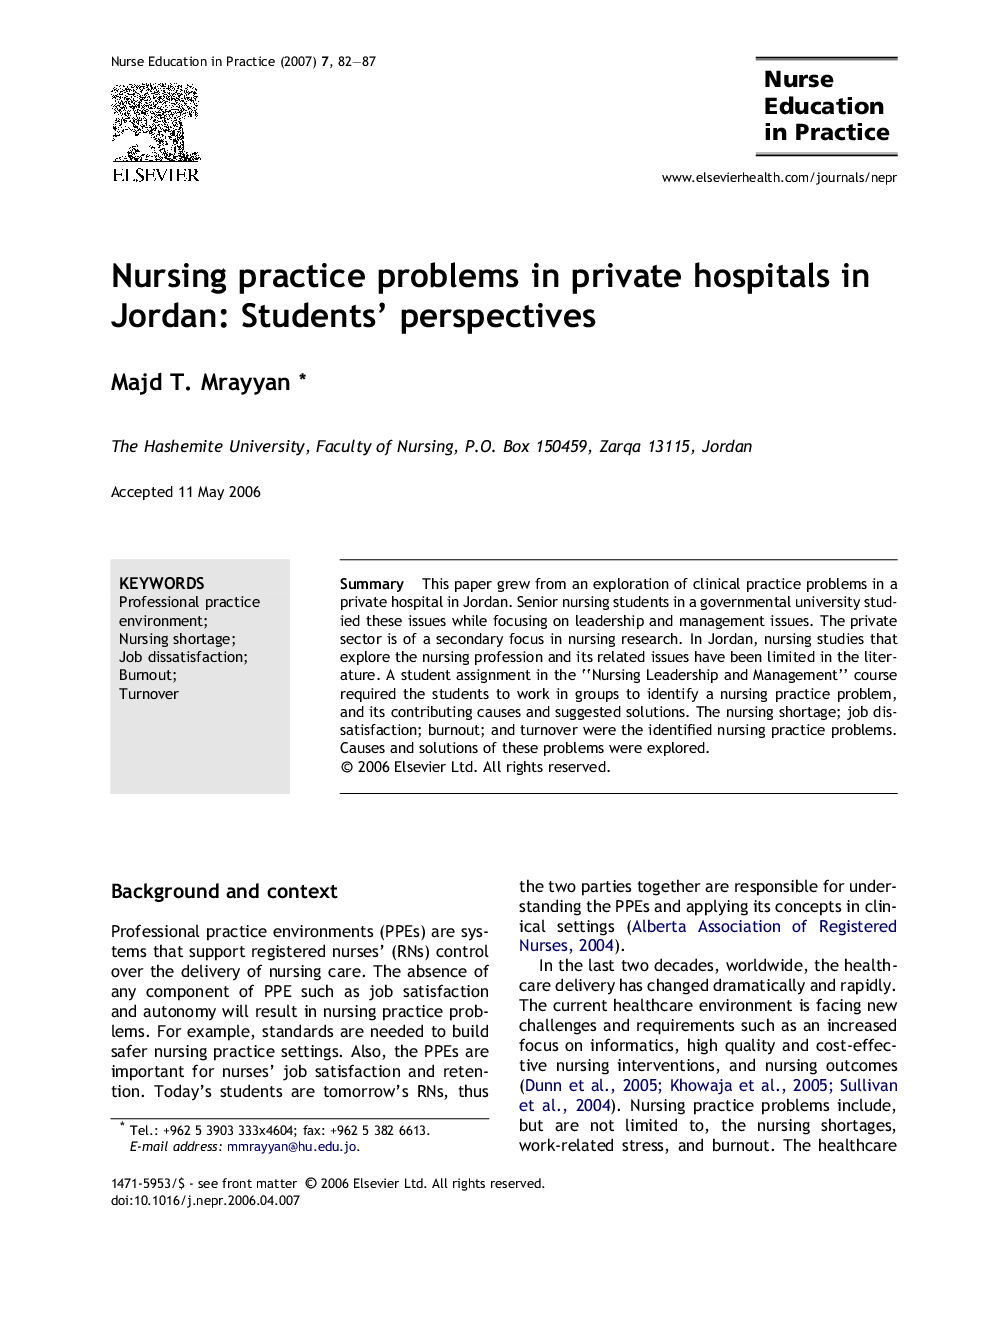 Nursing practice problems in private hospitals in Jordan: Students’ perspectives